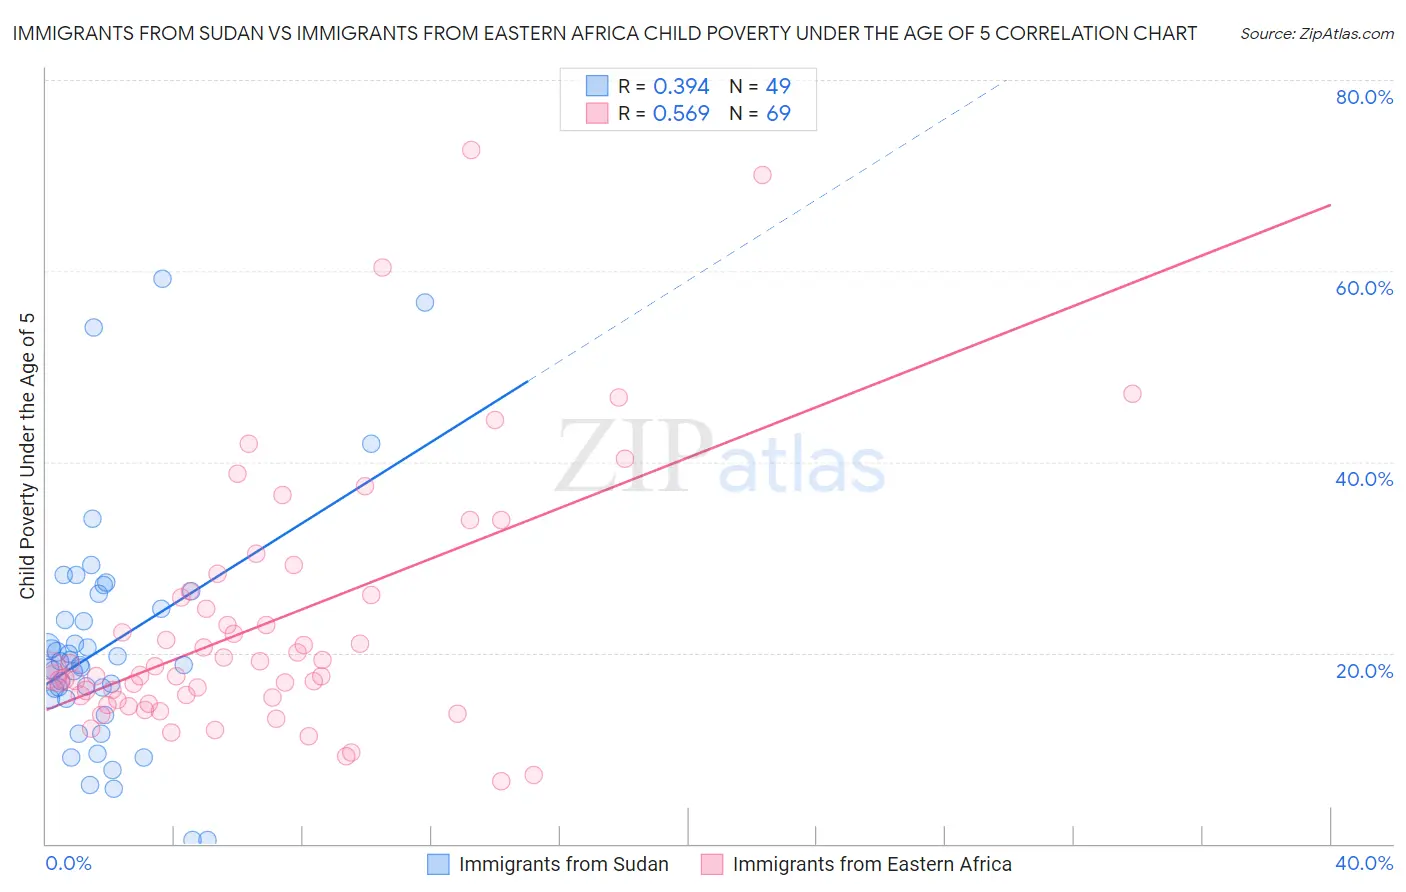 Immigrants from Sudan vs Immigrants from Eastern Africa Child Poverty Under the Age of 5